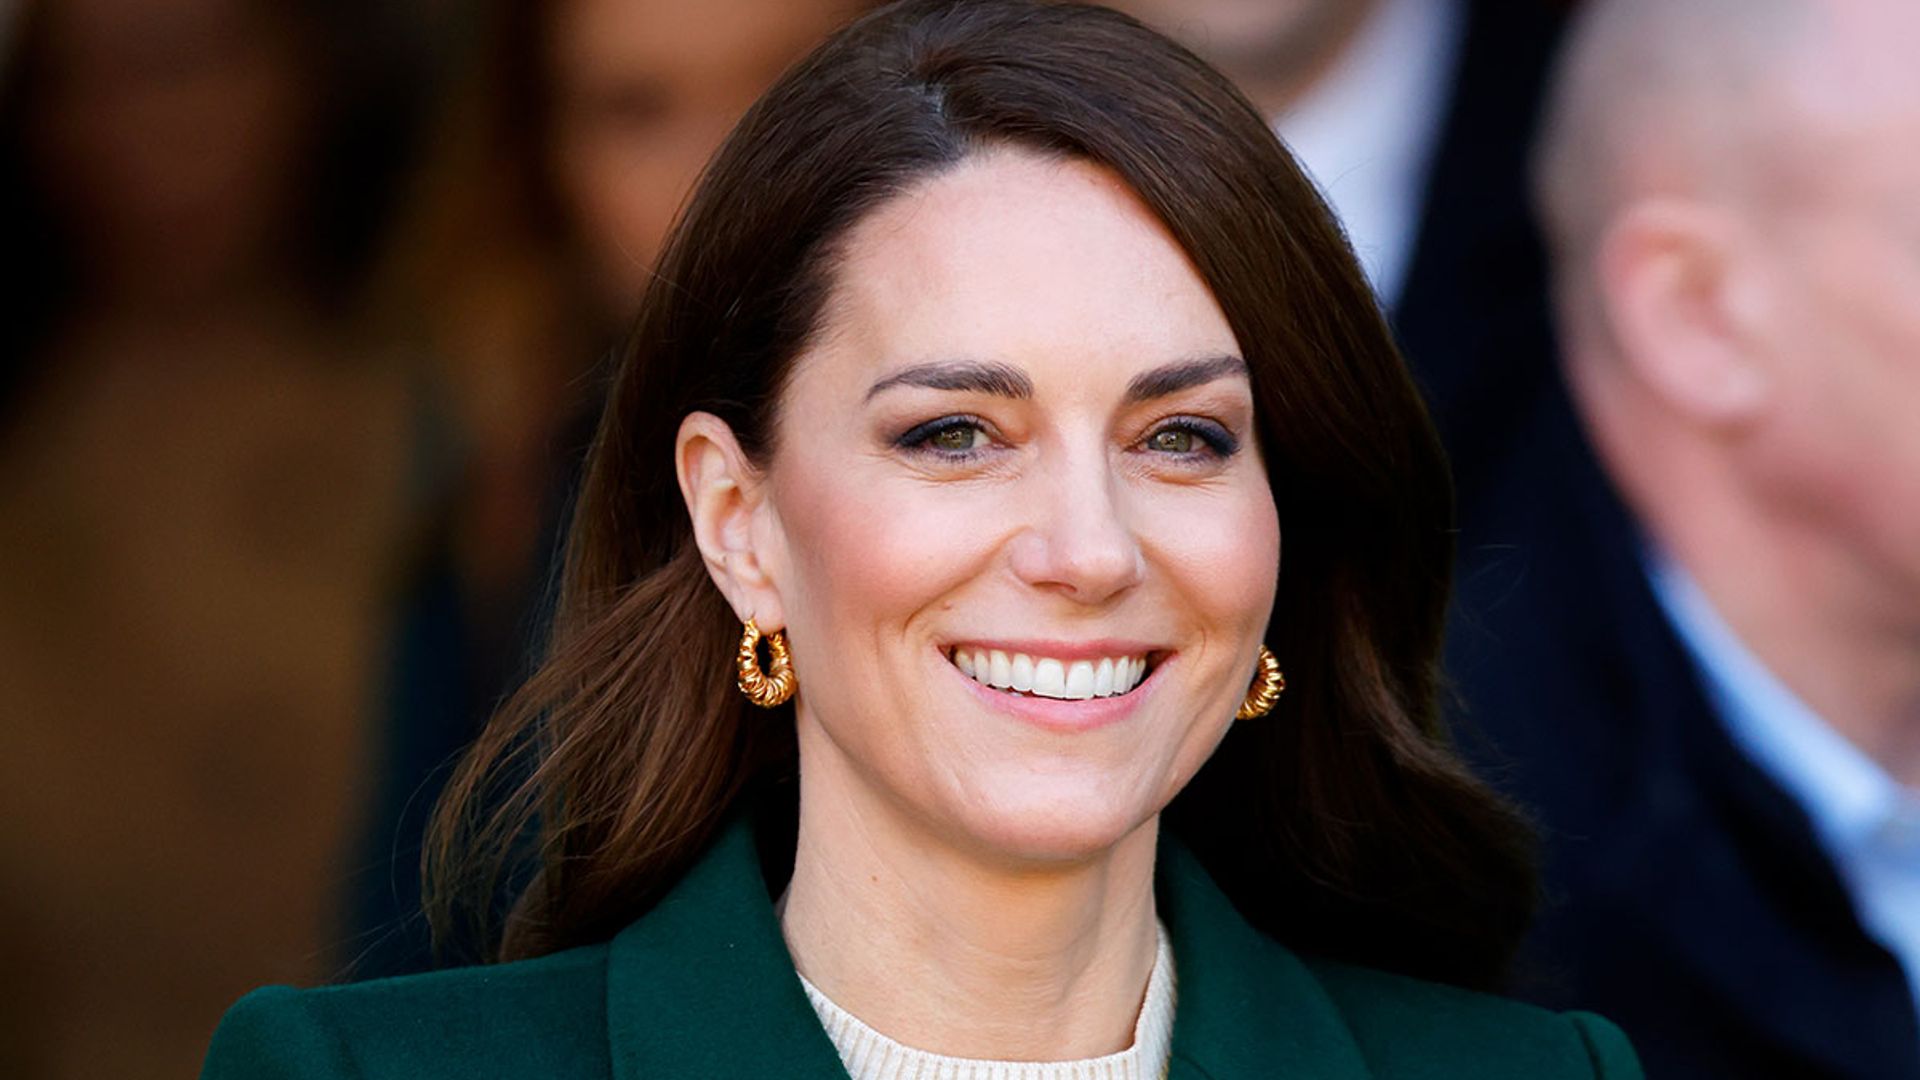 Kate Middleton celebrates family occasion after missing Commonwealth ...